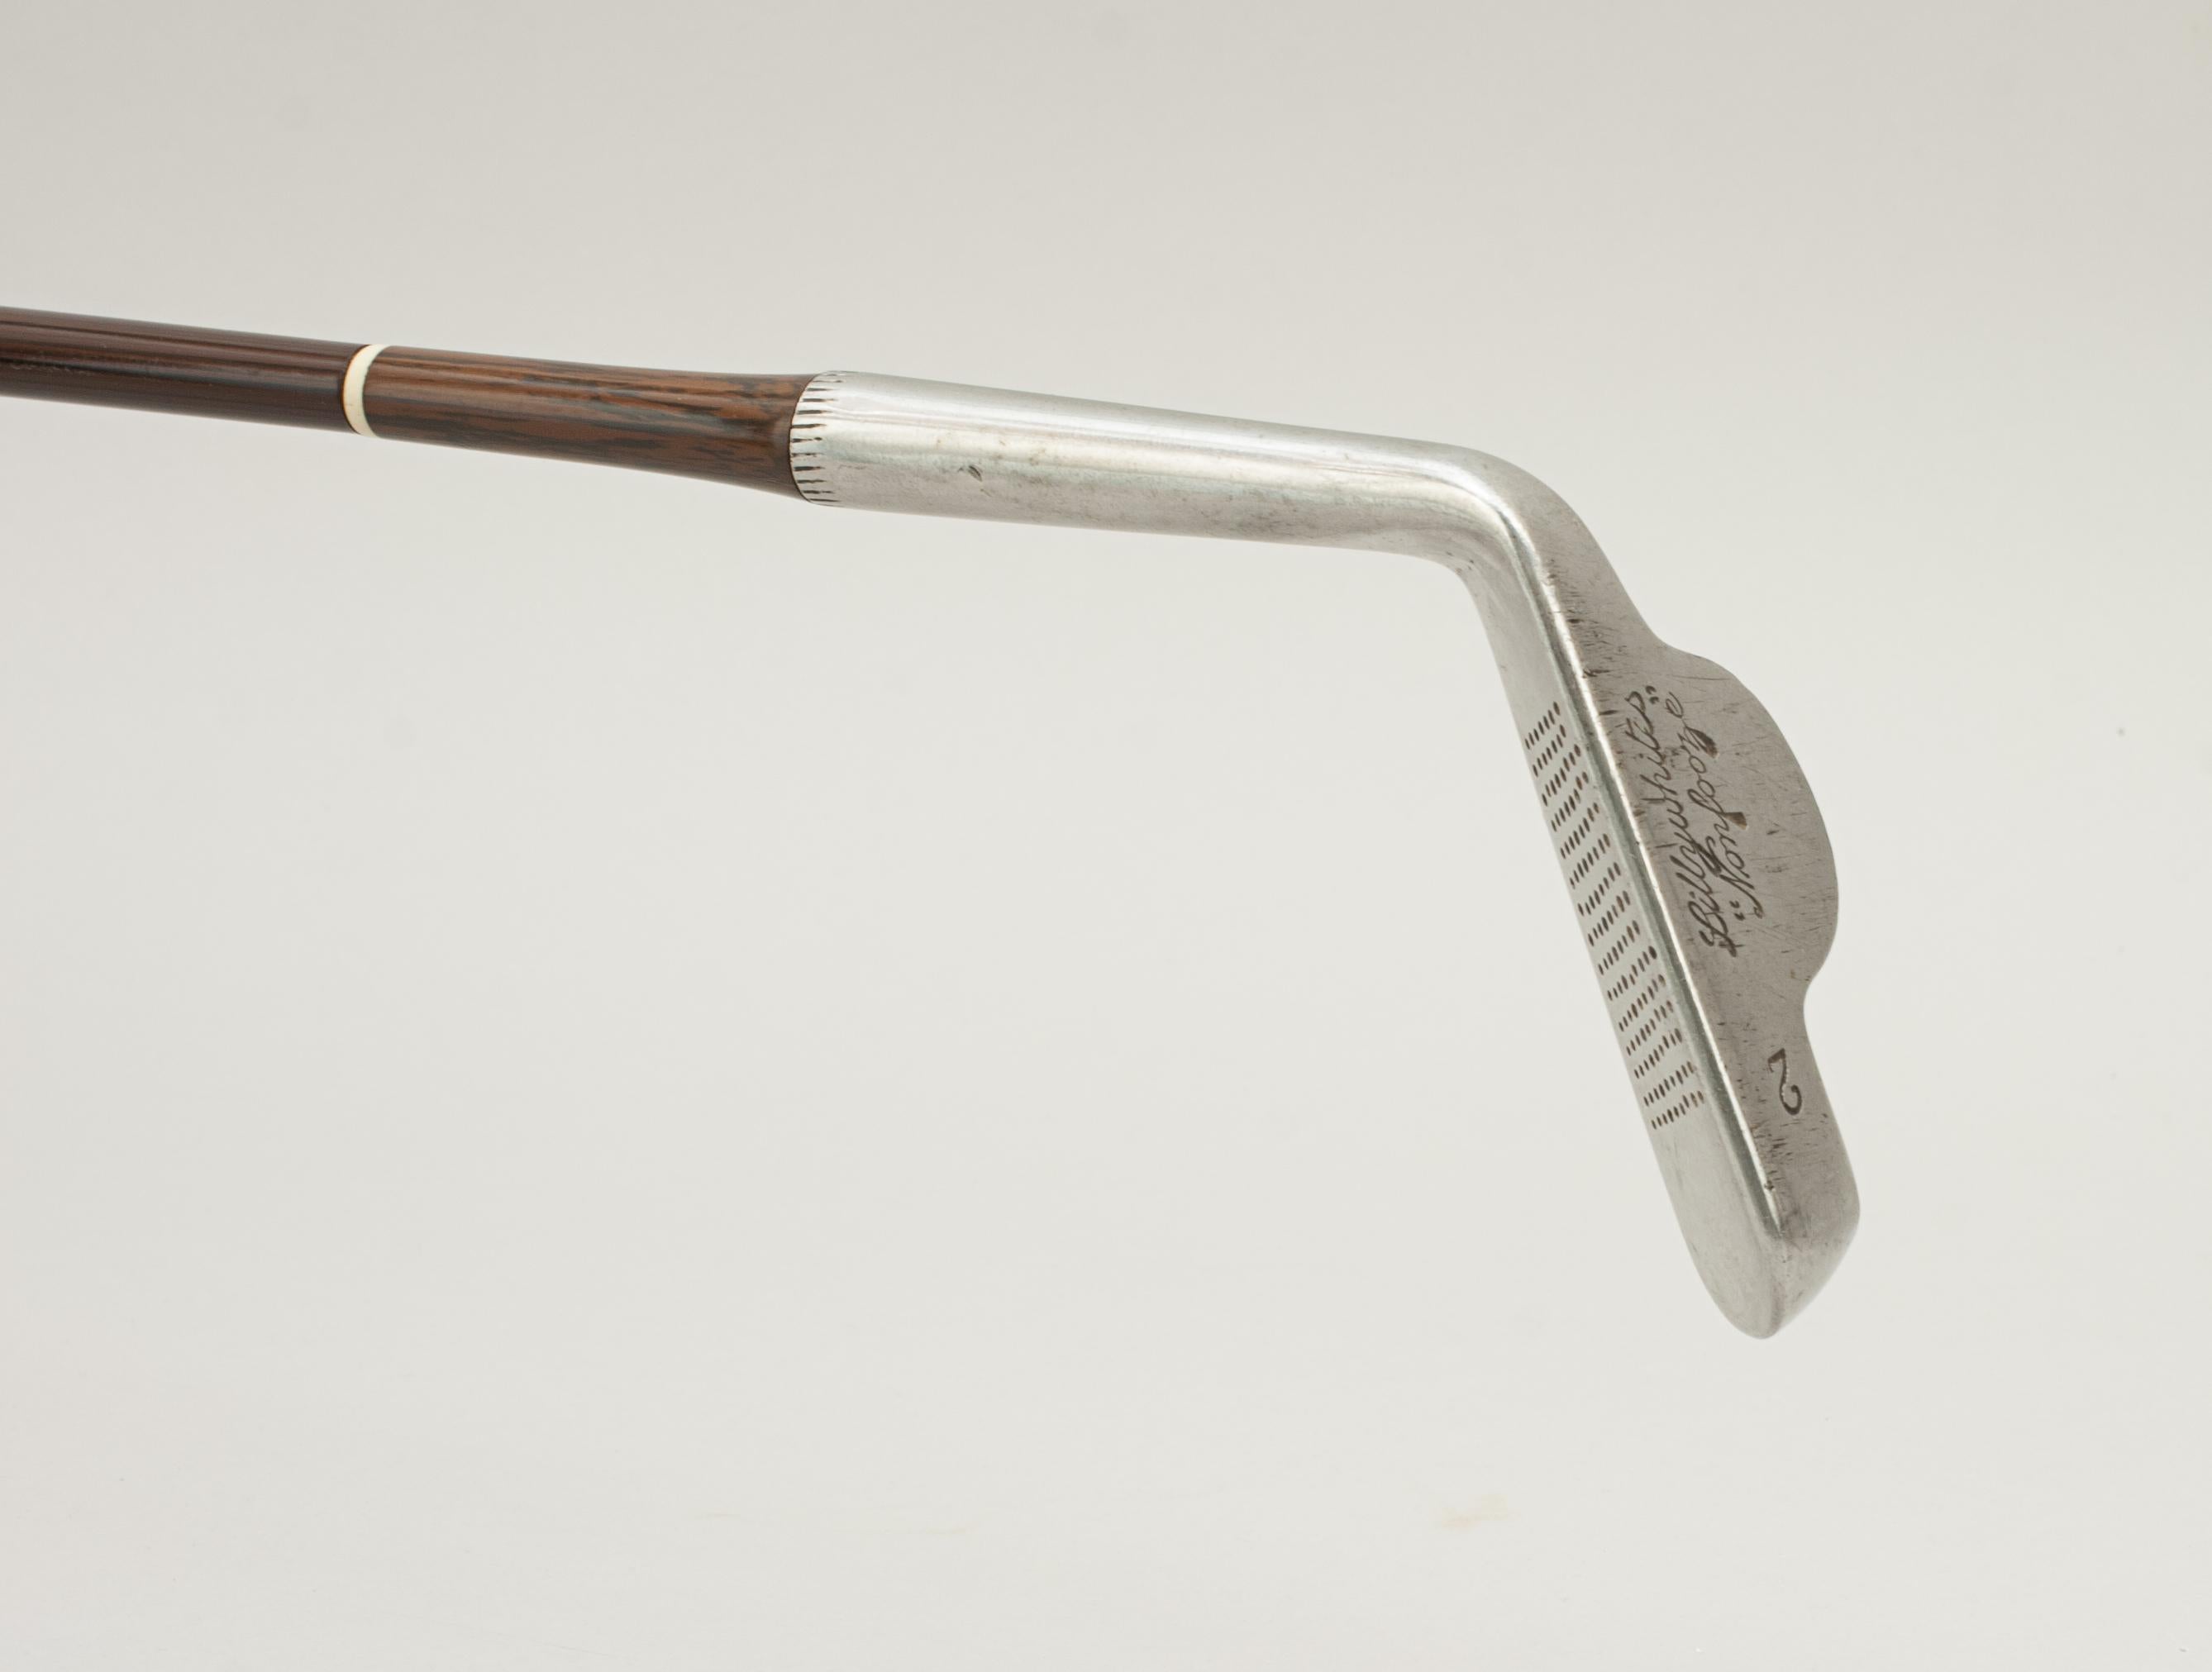 Lillywhite's 'Nonfooze' Steel Shafted Golf Club, Chipper 3